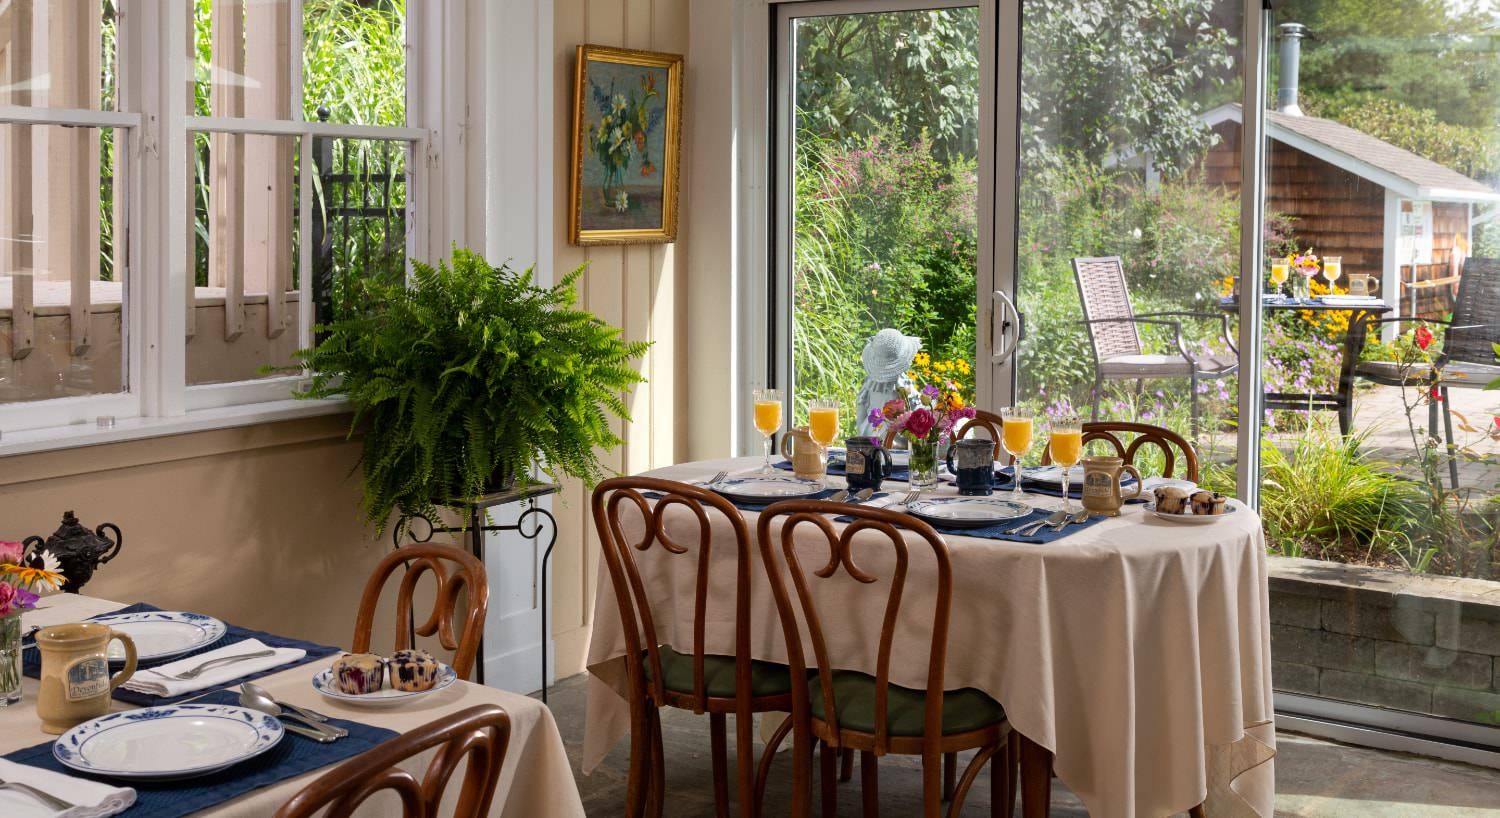 Tables with cream tablecloth set up for breakfast in a room with large sliding glass door and view to the patio surrounded by green vegetation